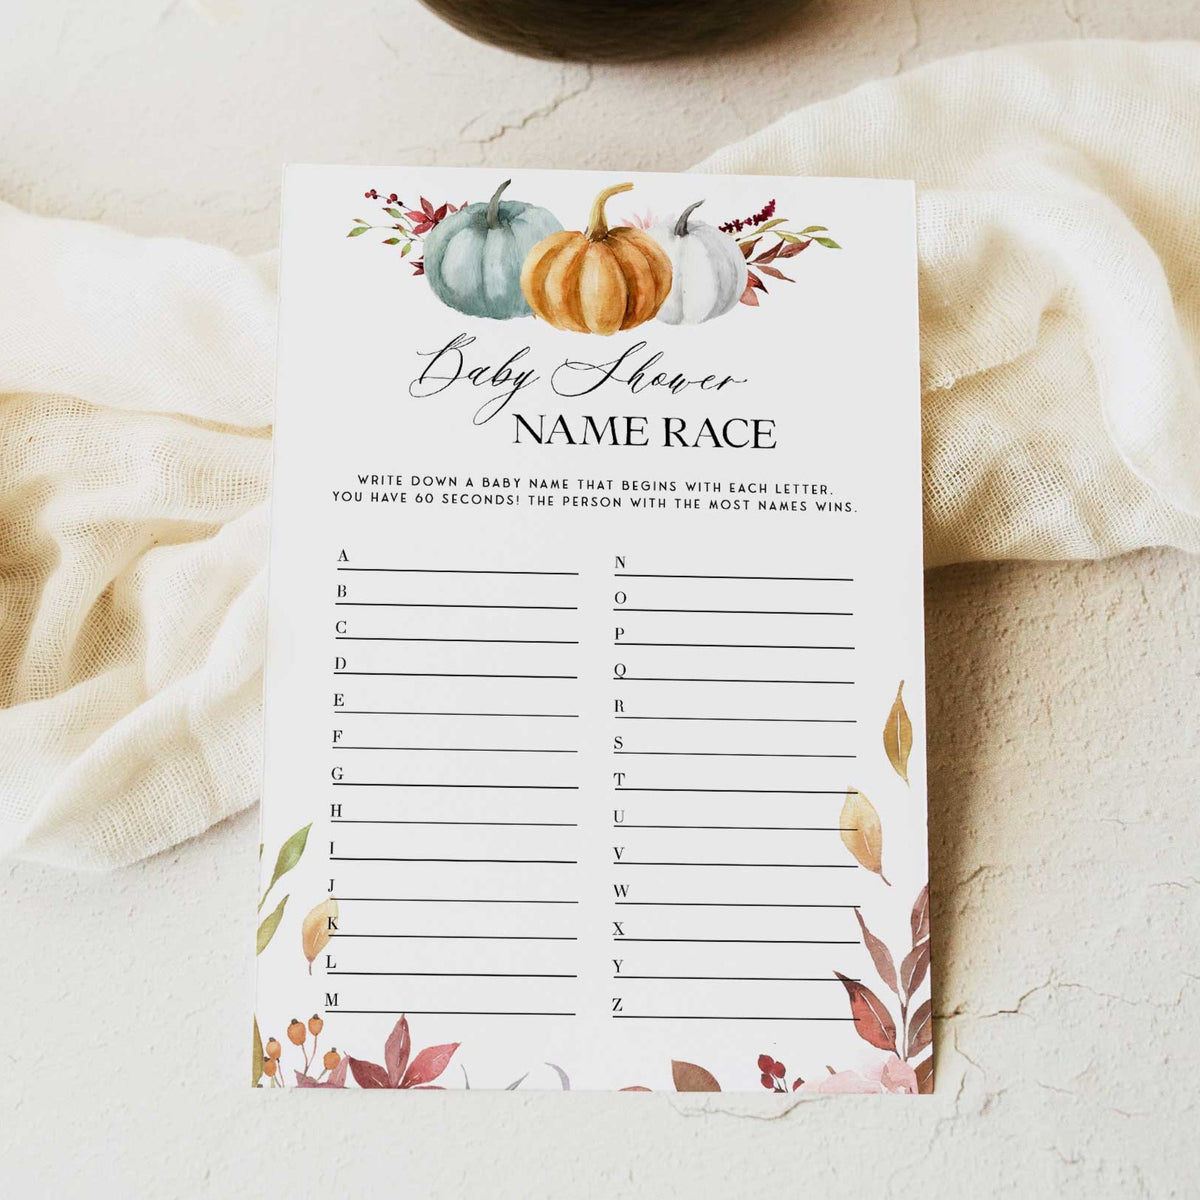 Fully editable and printable baby shower baby name race game with a fall pumpkin design. Perfect for a Fall Pumpkin baby shower themed party